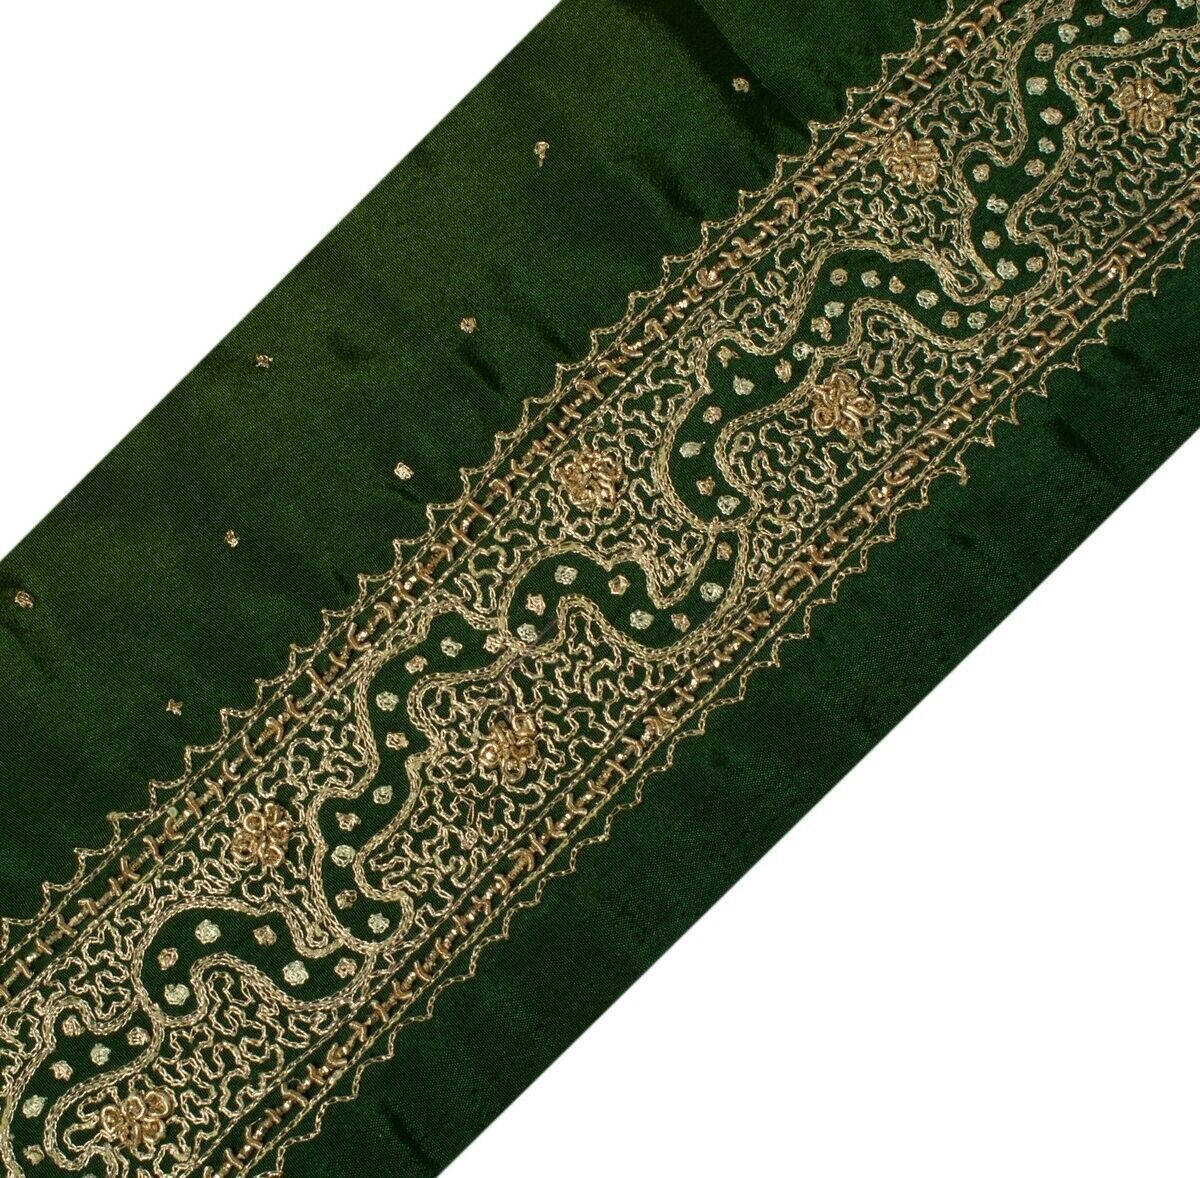 Vintage Sari Border Indian Craft Sewing Trim Hand Beaded Embroidered Green Lace